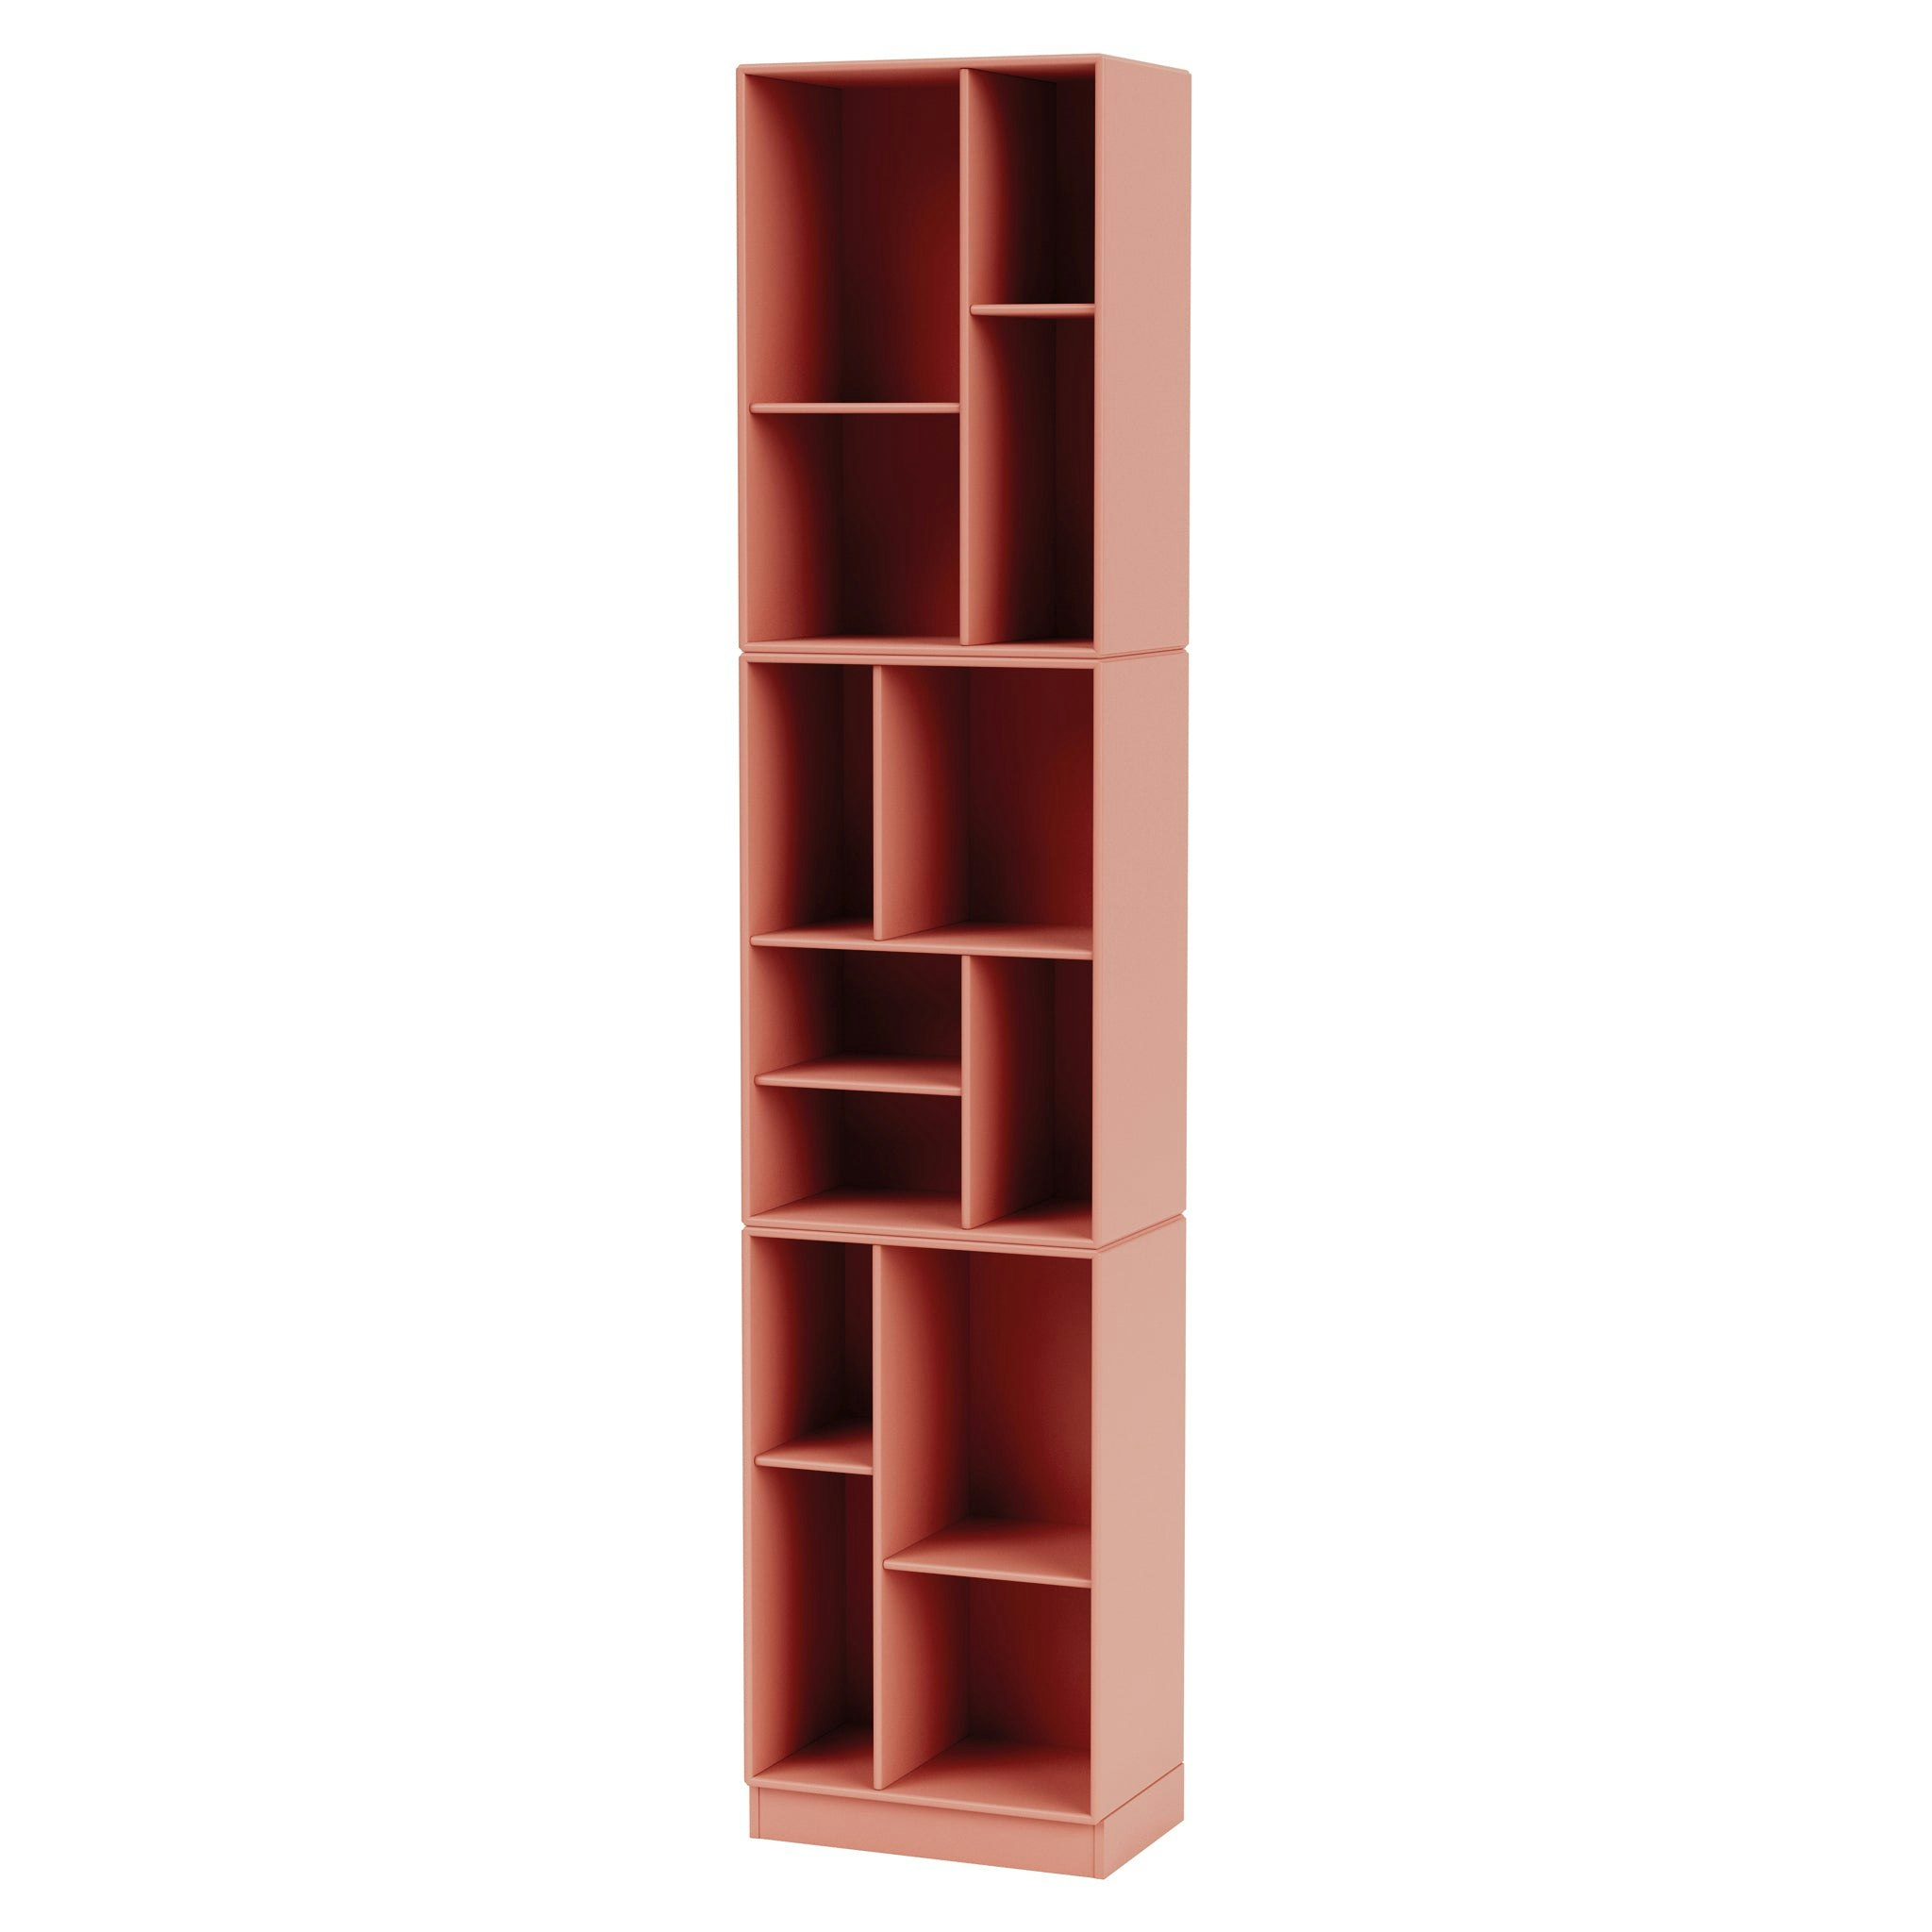 Loom Bookcase by Montana Furniture